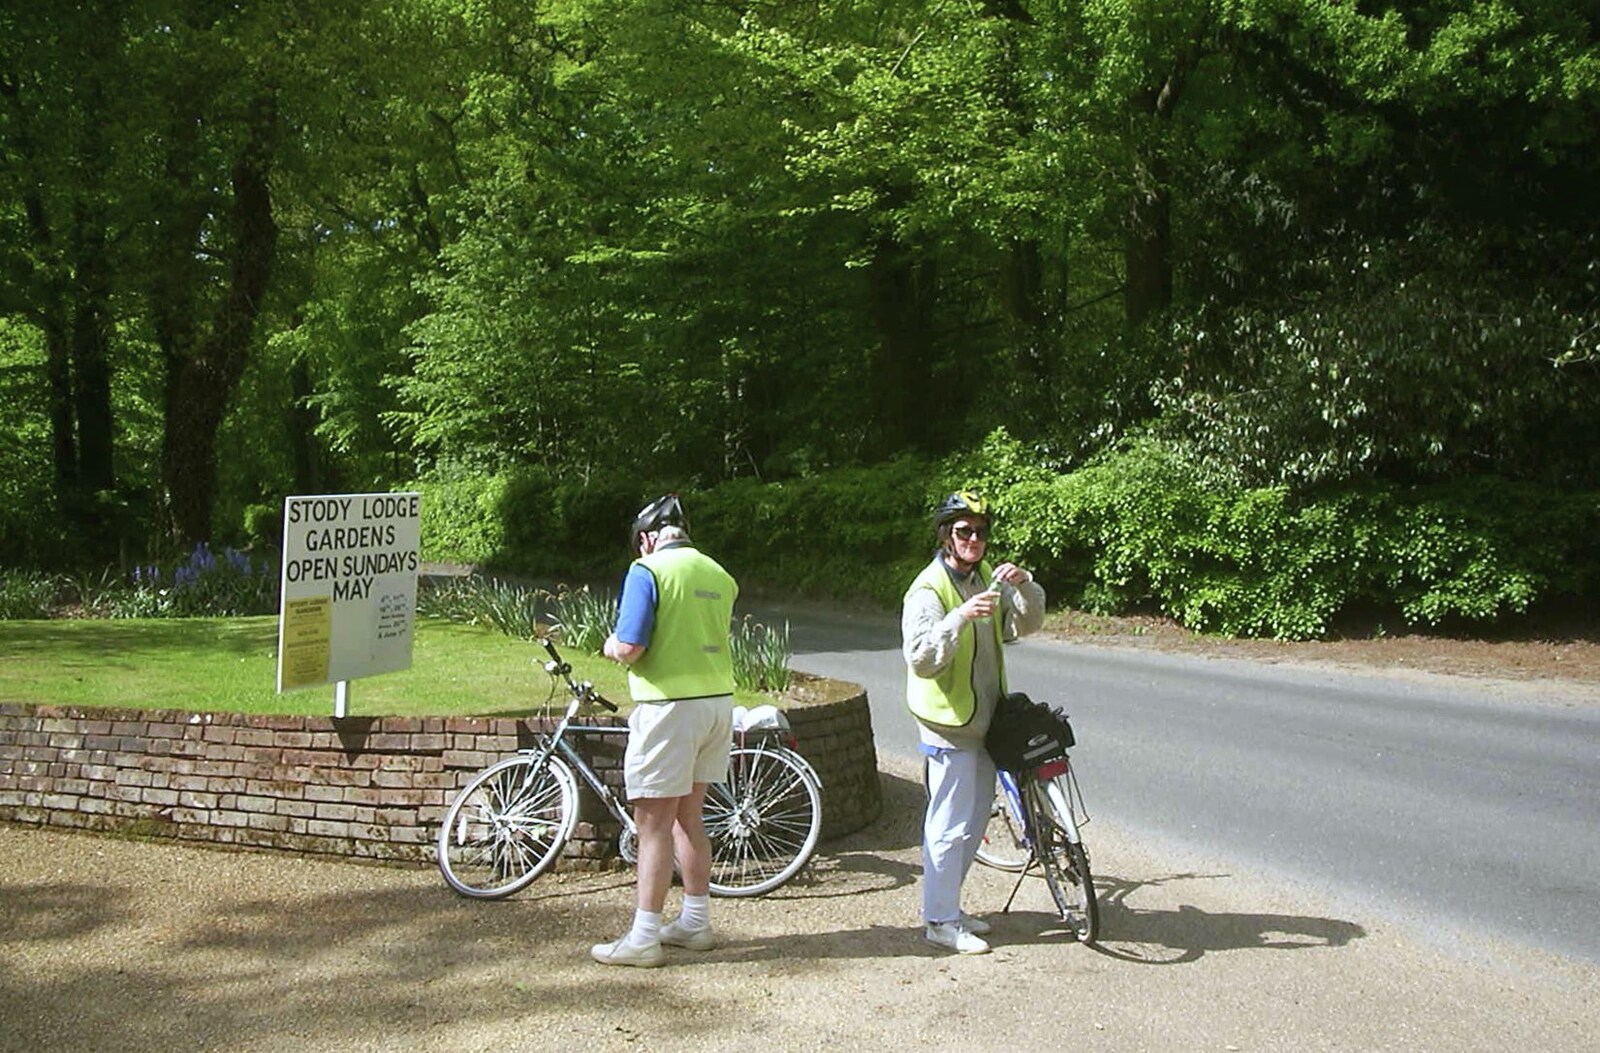 The BSCC Bike Ride Weekend, Kelling, Norfolk - 9th May 2003: Colin and Jill pause for a drink